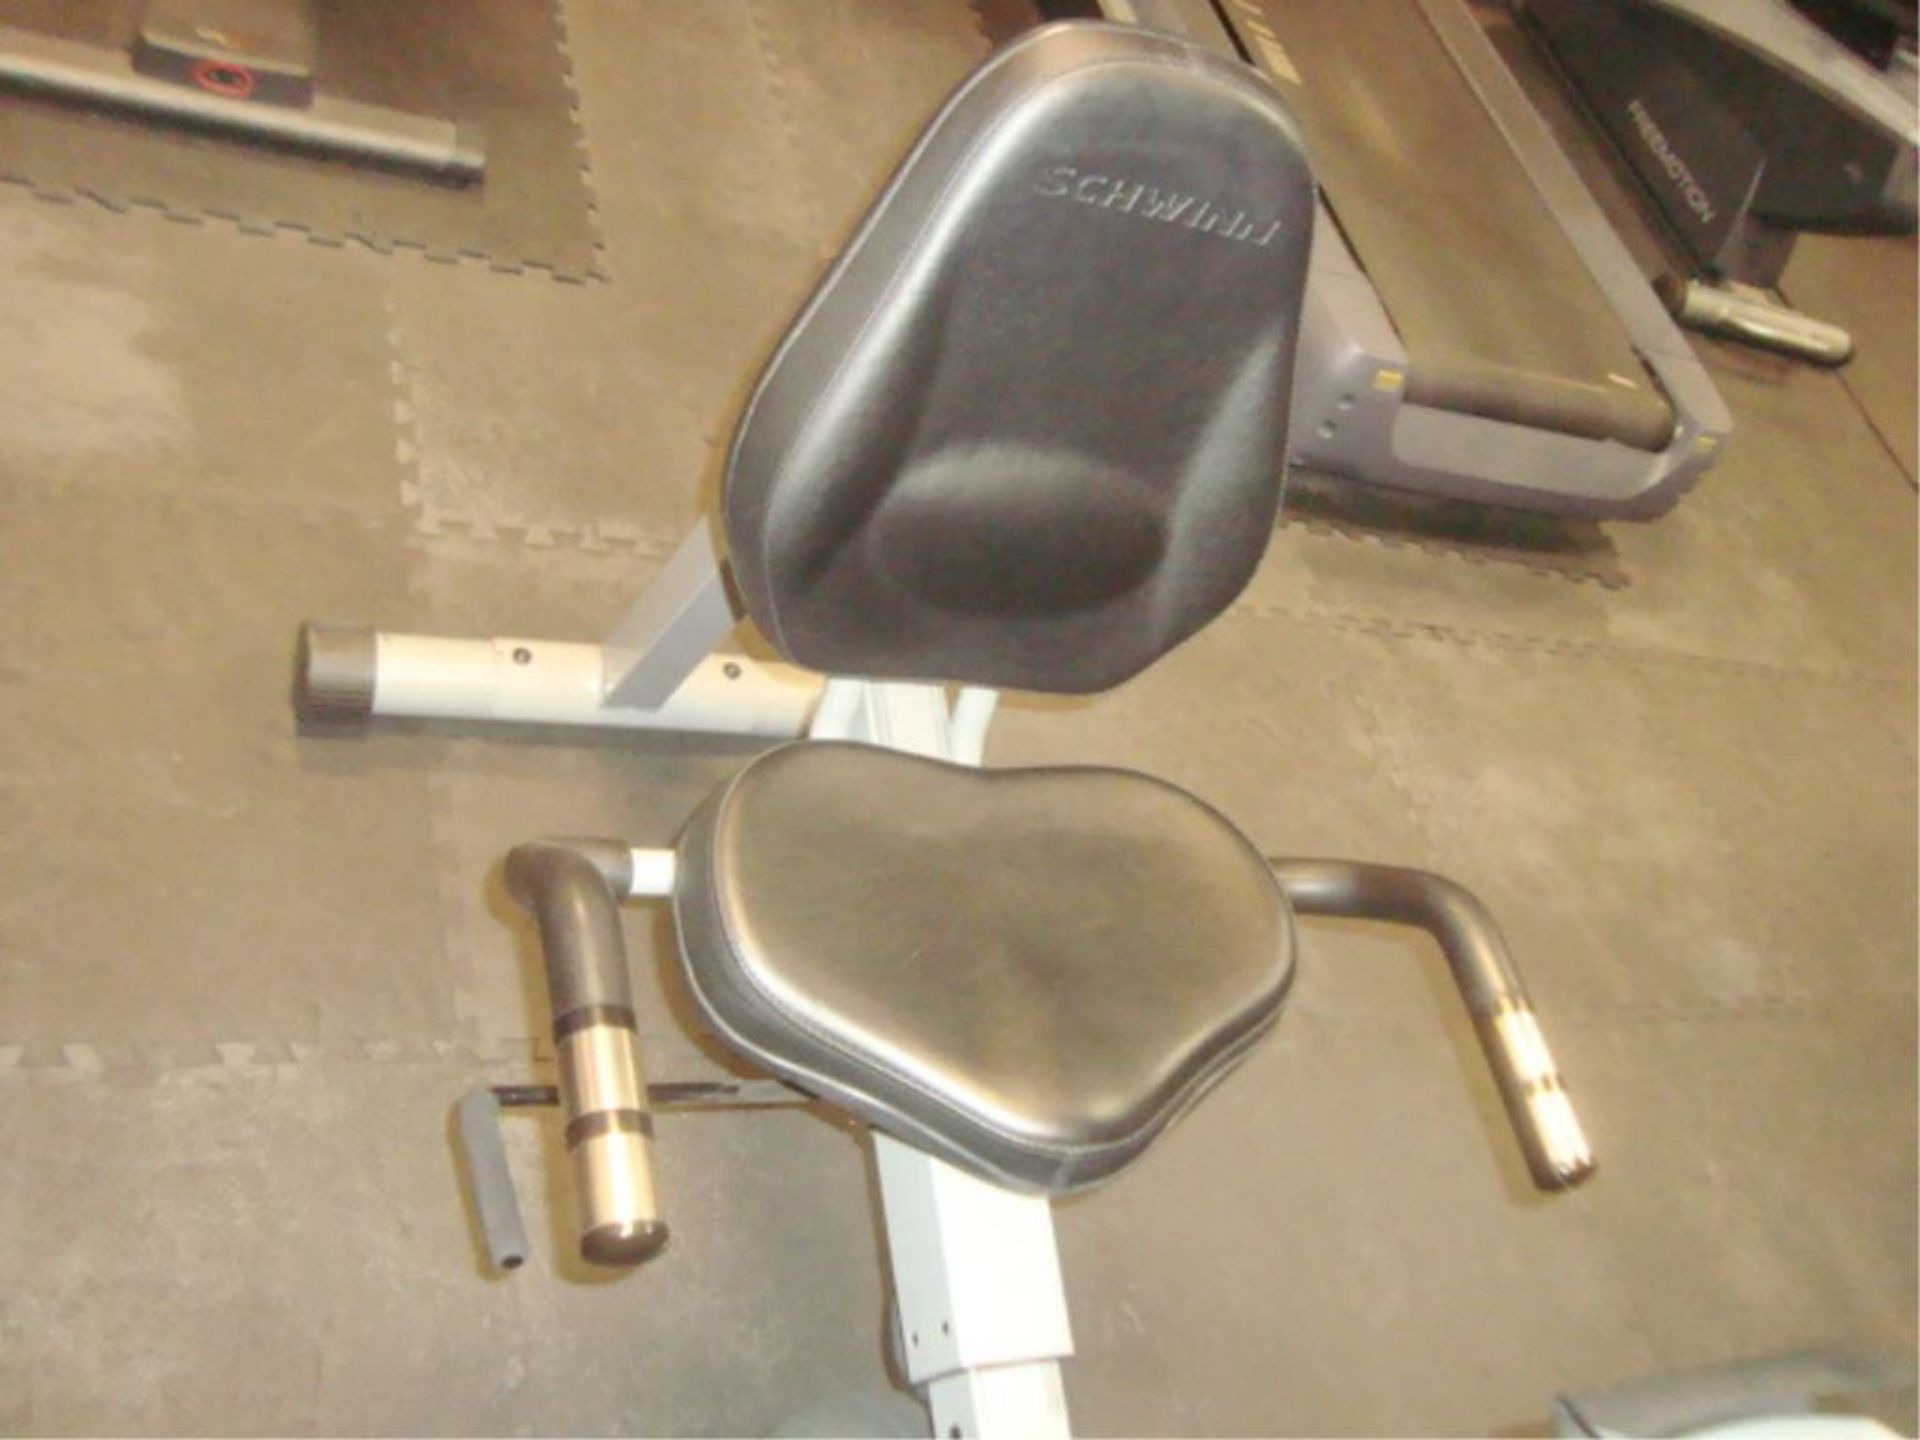 Exerciser Cycling Machine - Image 4 of 7